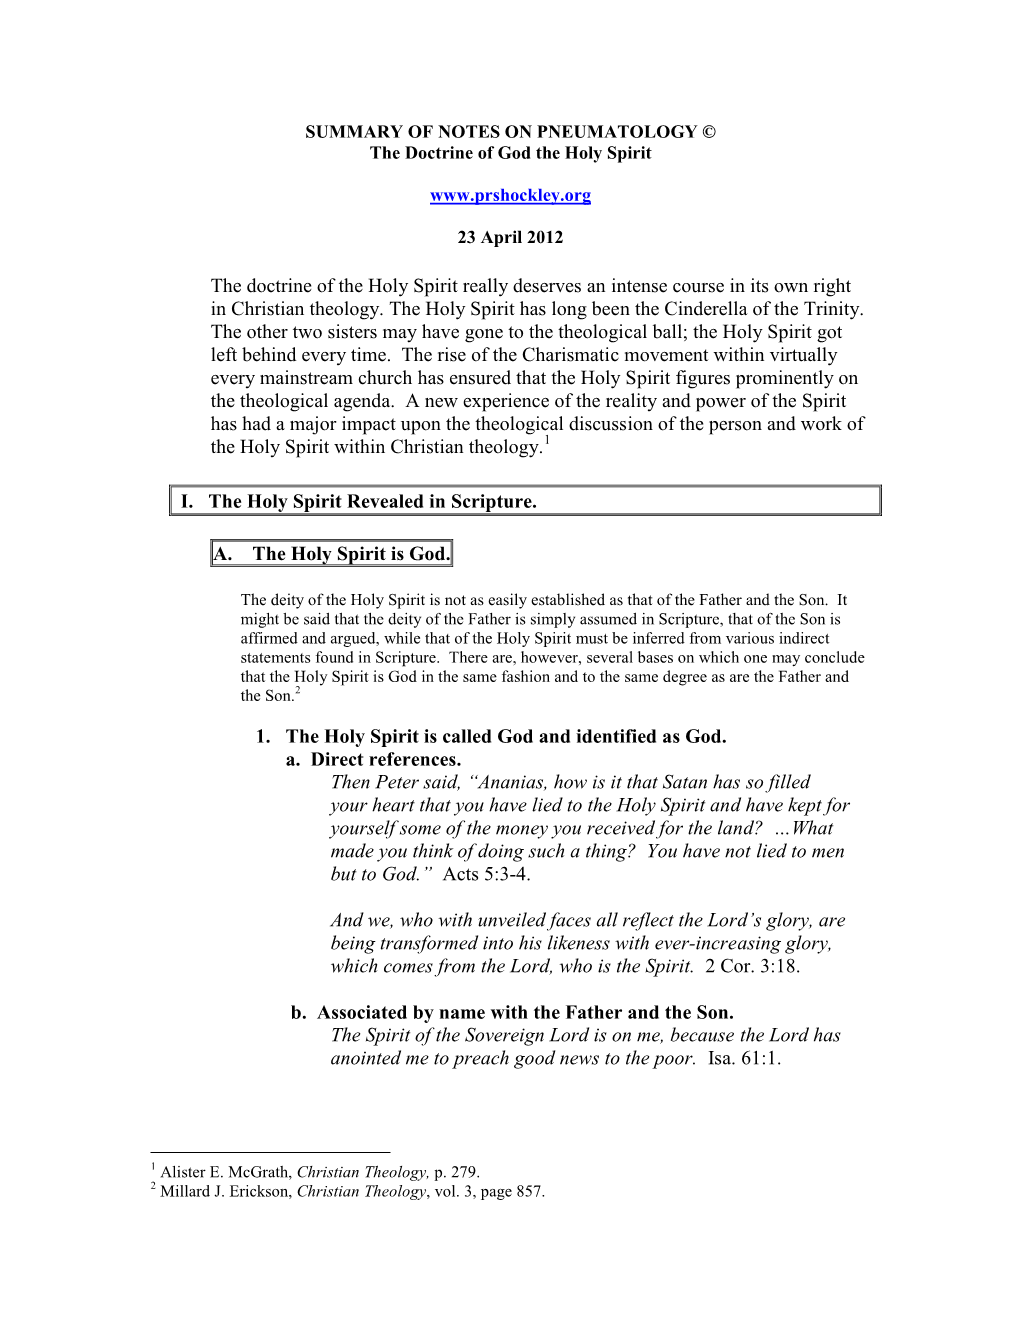 Lecture 6 Christianity Pneumatology Notes Revised